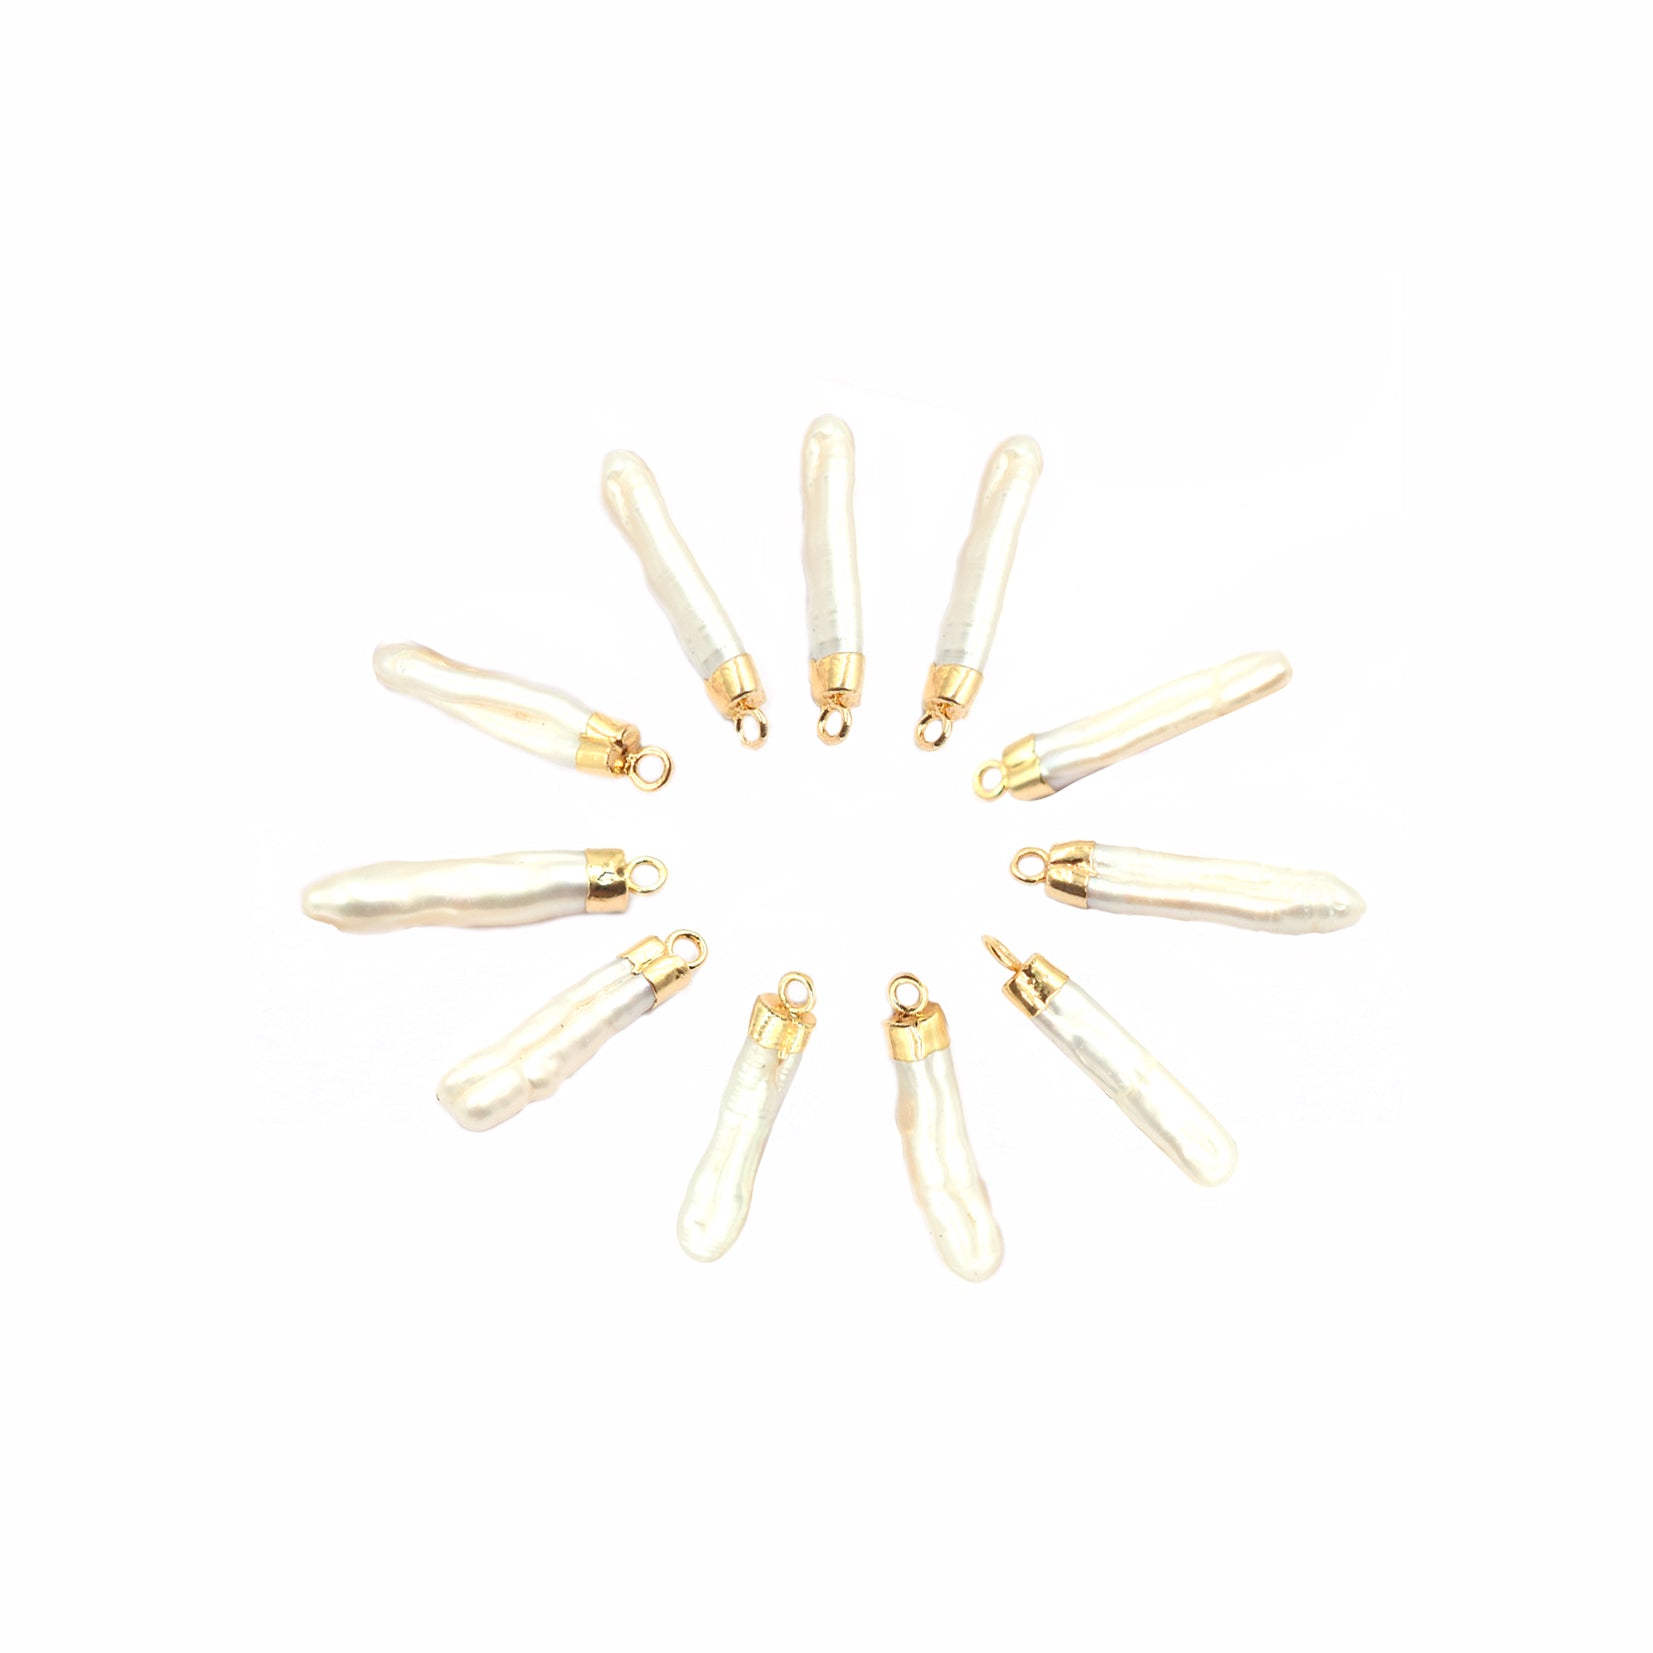 Fresh Water Pearl 16X3 To 20X3 MM Pencil Shape Gold Electroplated Pendant (Set Of 2 Pcs)